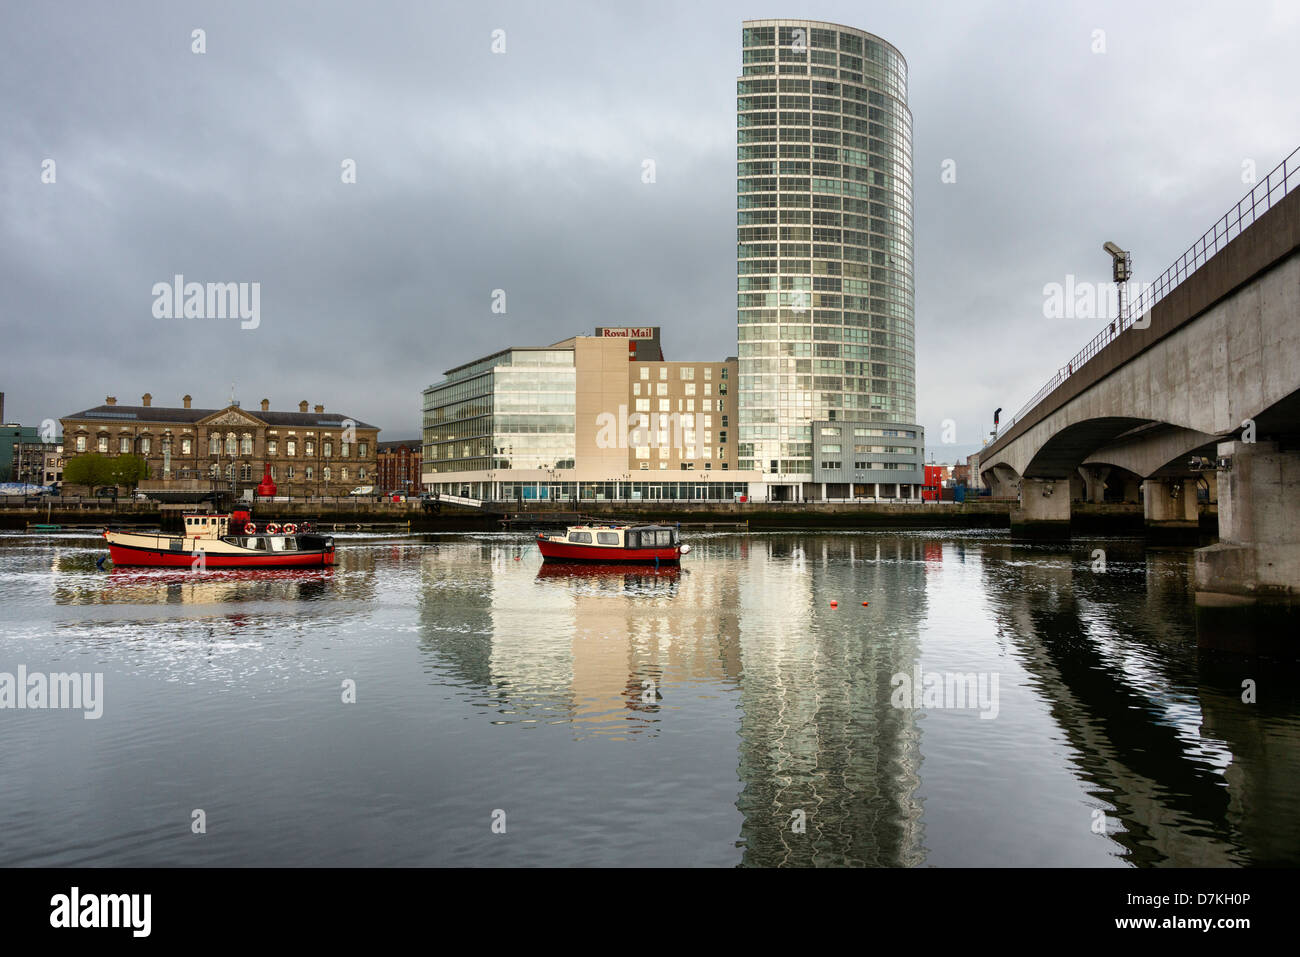 The Obel tower and the Royal Mail Building across the River Lagan Belfast Stock Photo